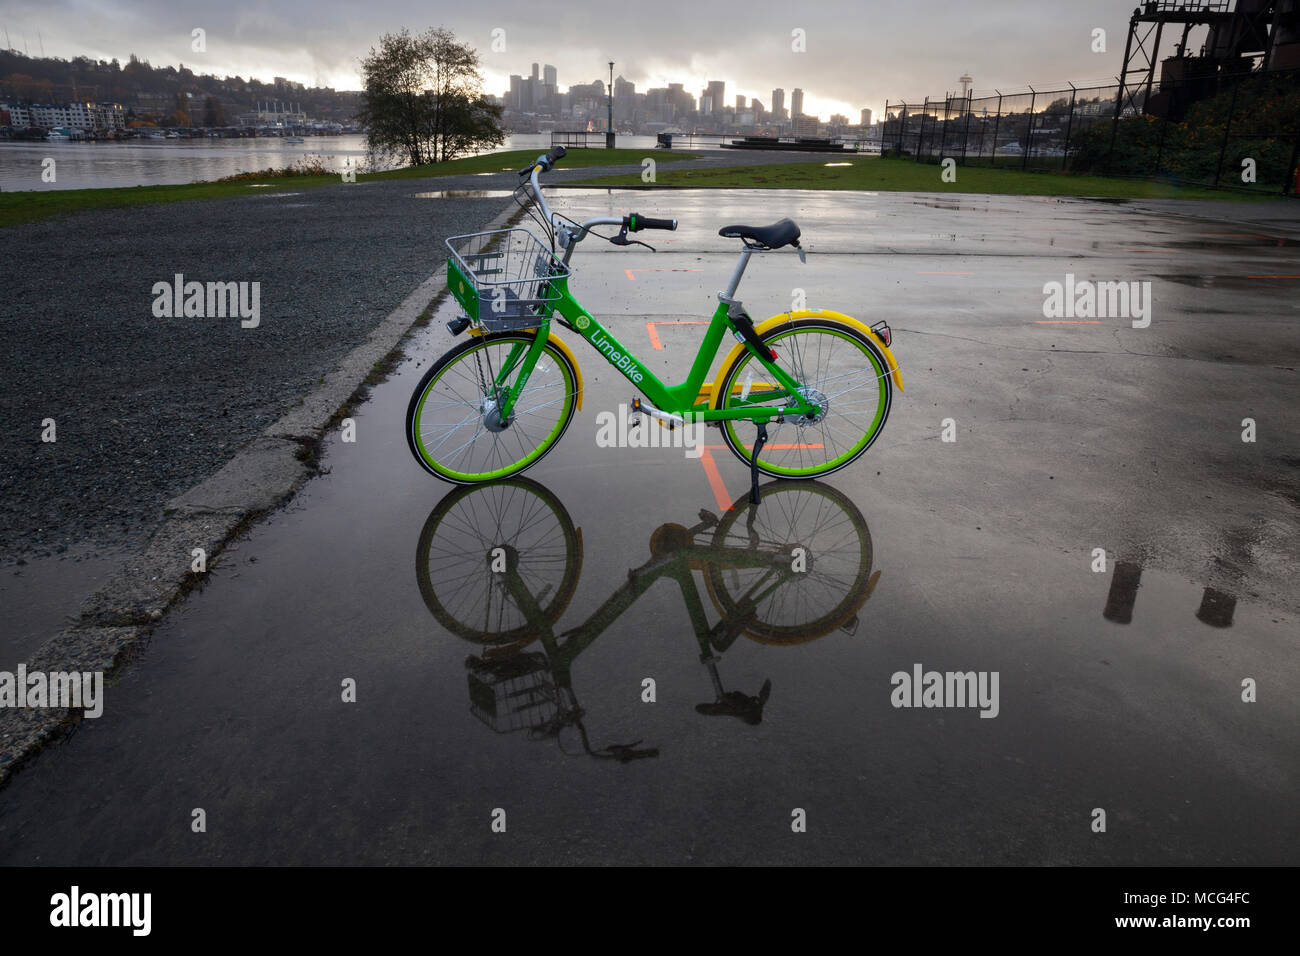 WA14368-00...WASHINGTON - Bike sharing program Lime Bike parked at Gas Works Park in Seattle on a rany wet day. Stock Photo